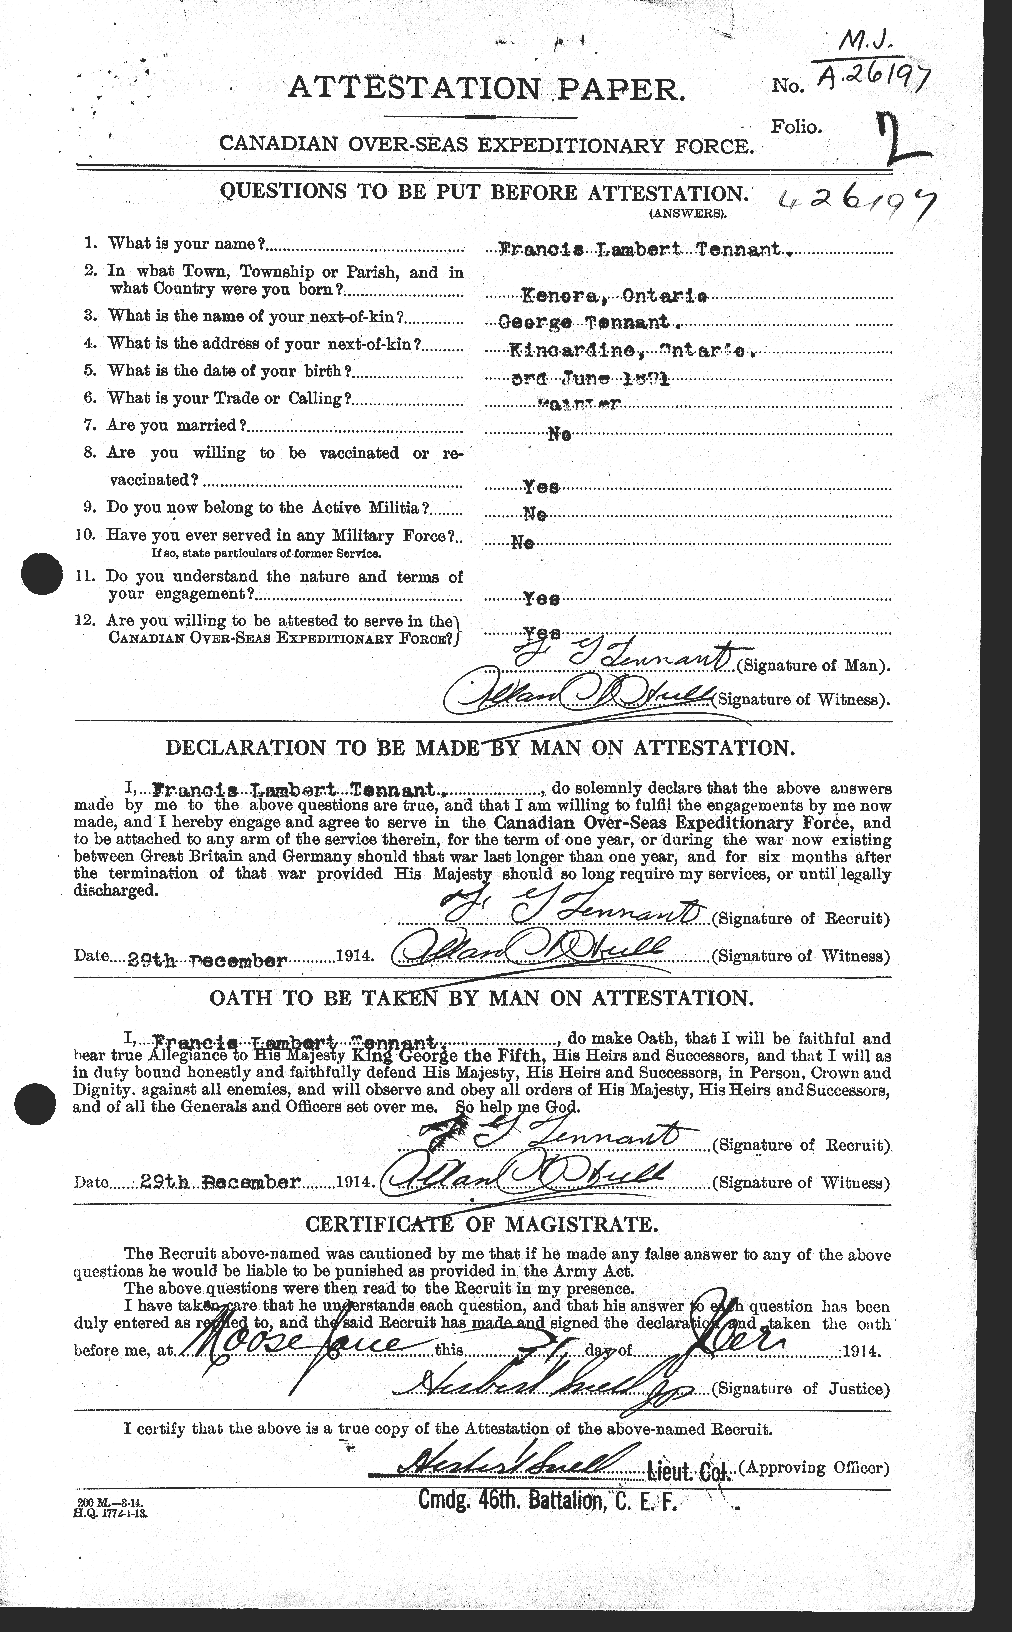 Personnel Records of the First World War - CEF 627851a